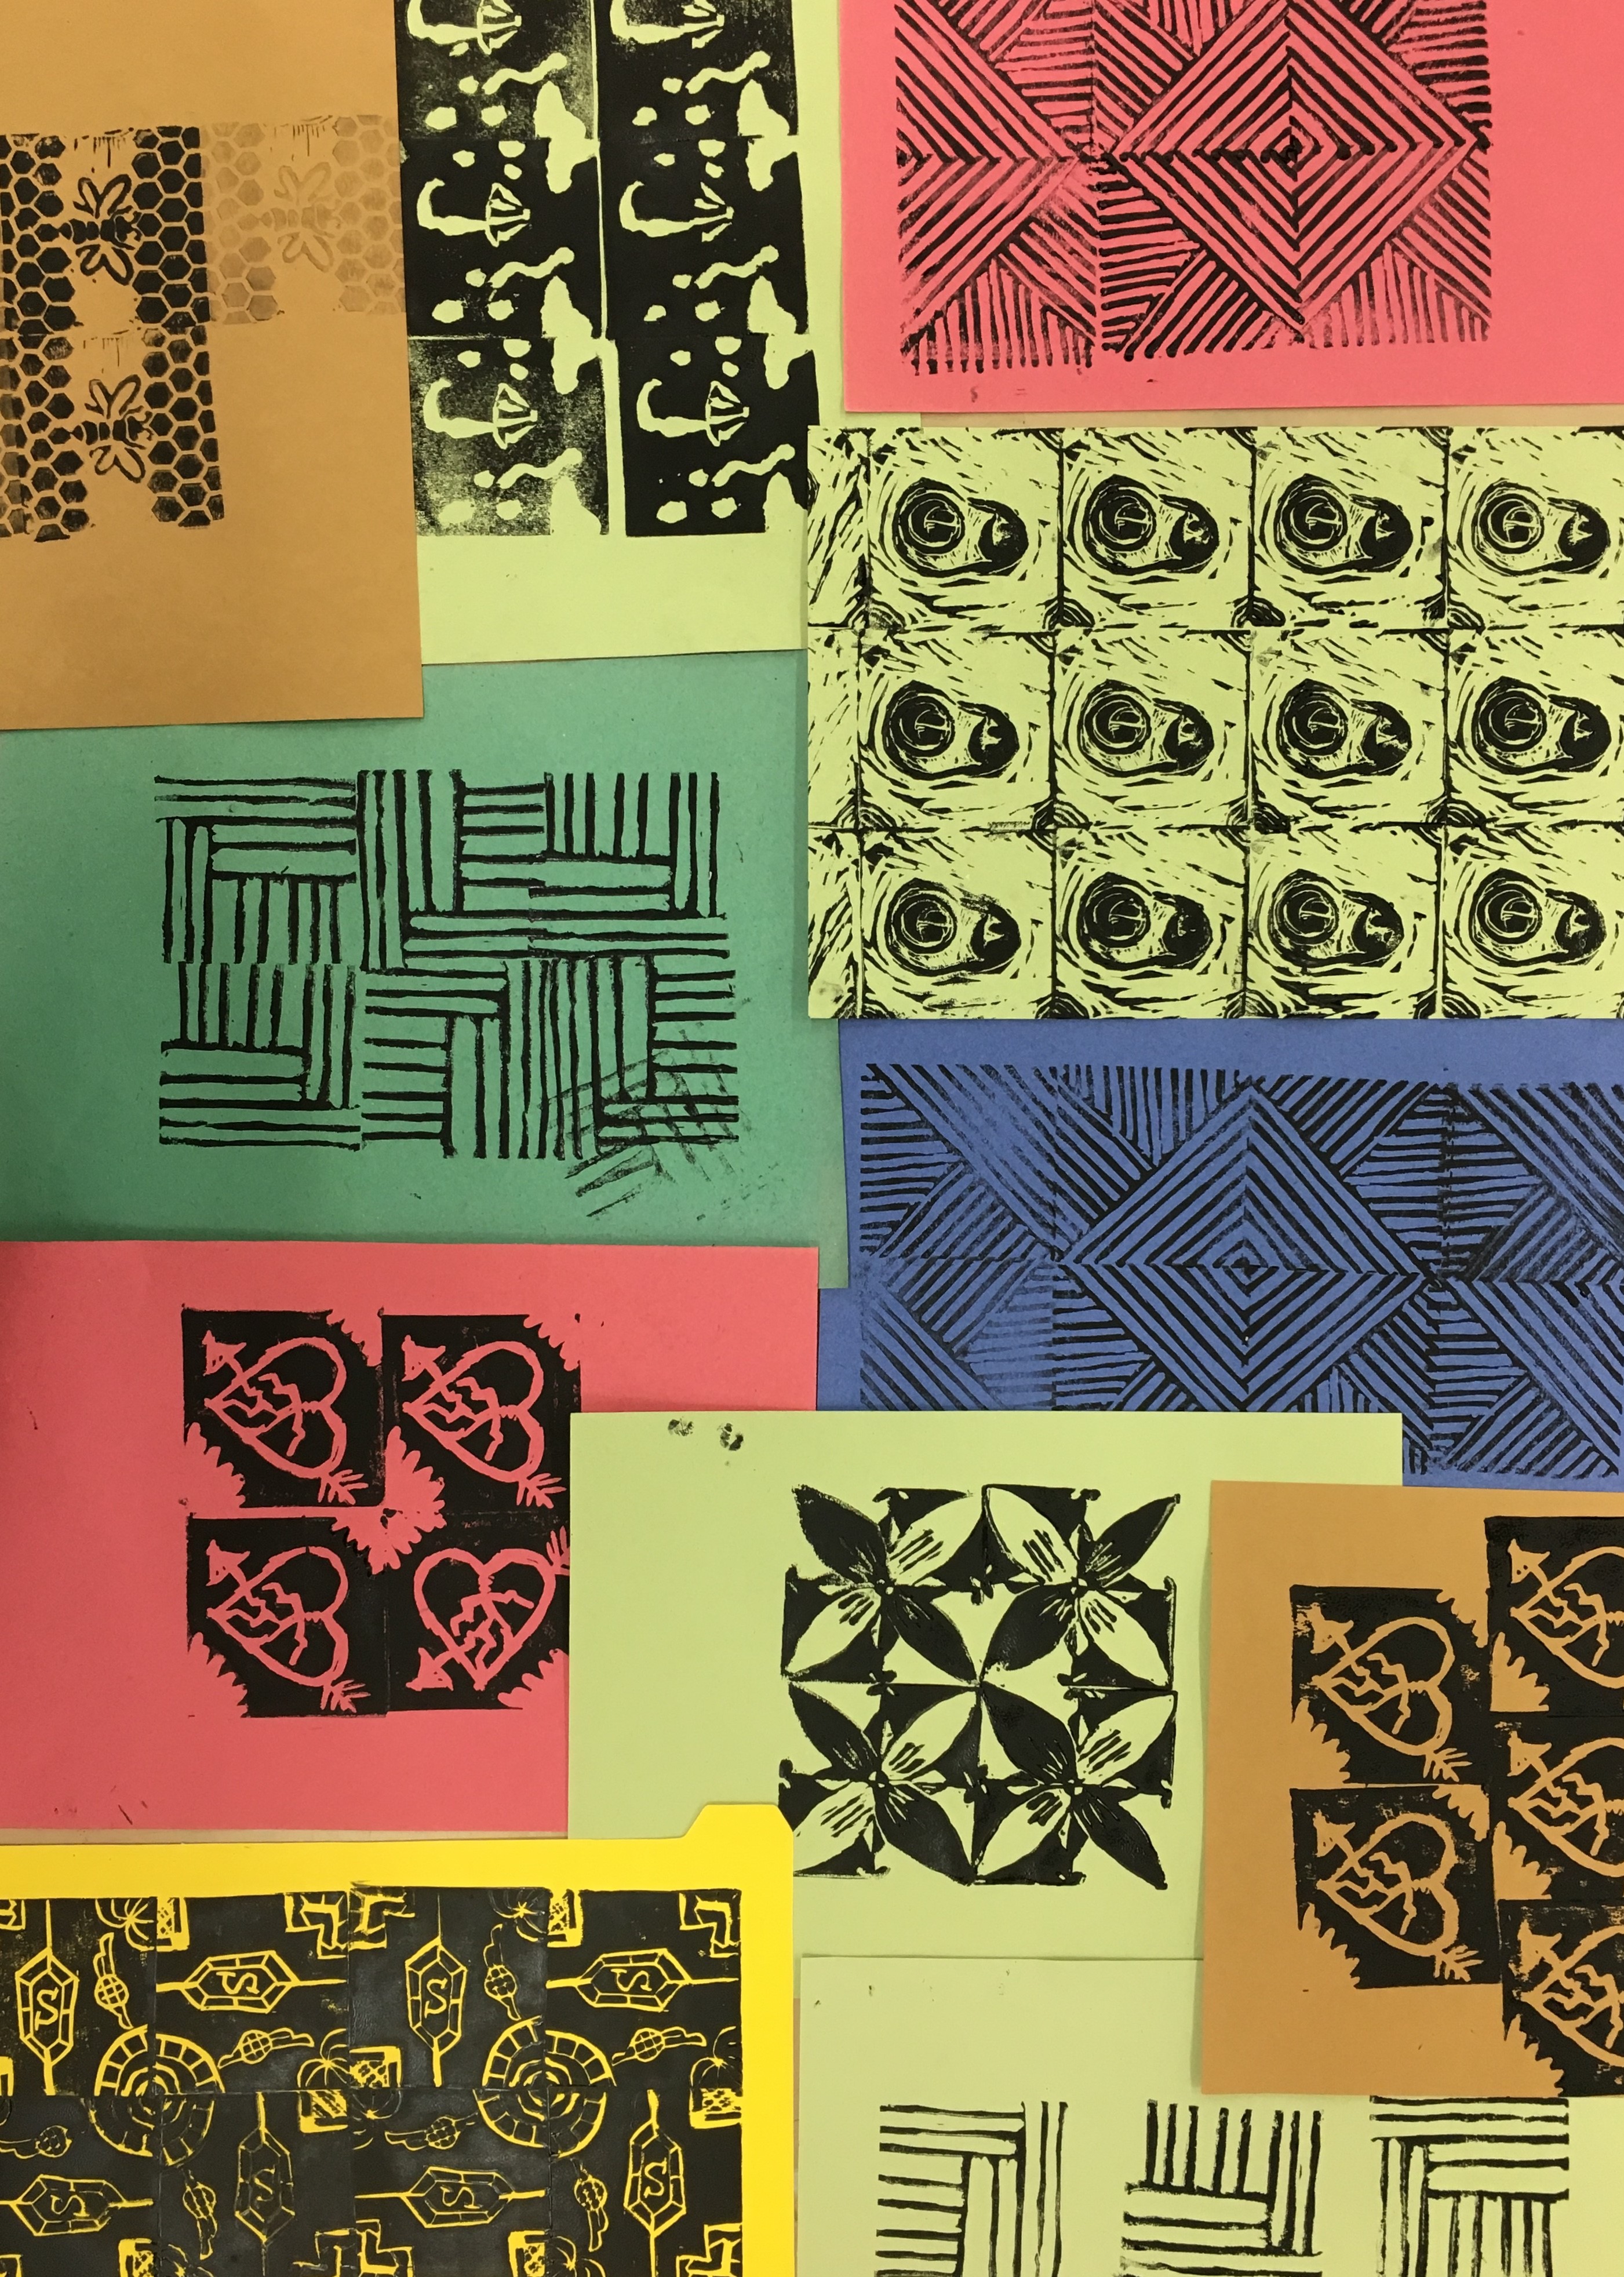 Pieces of coloured paper printed with graphic patterns in black